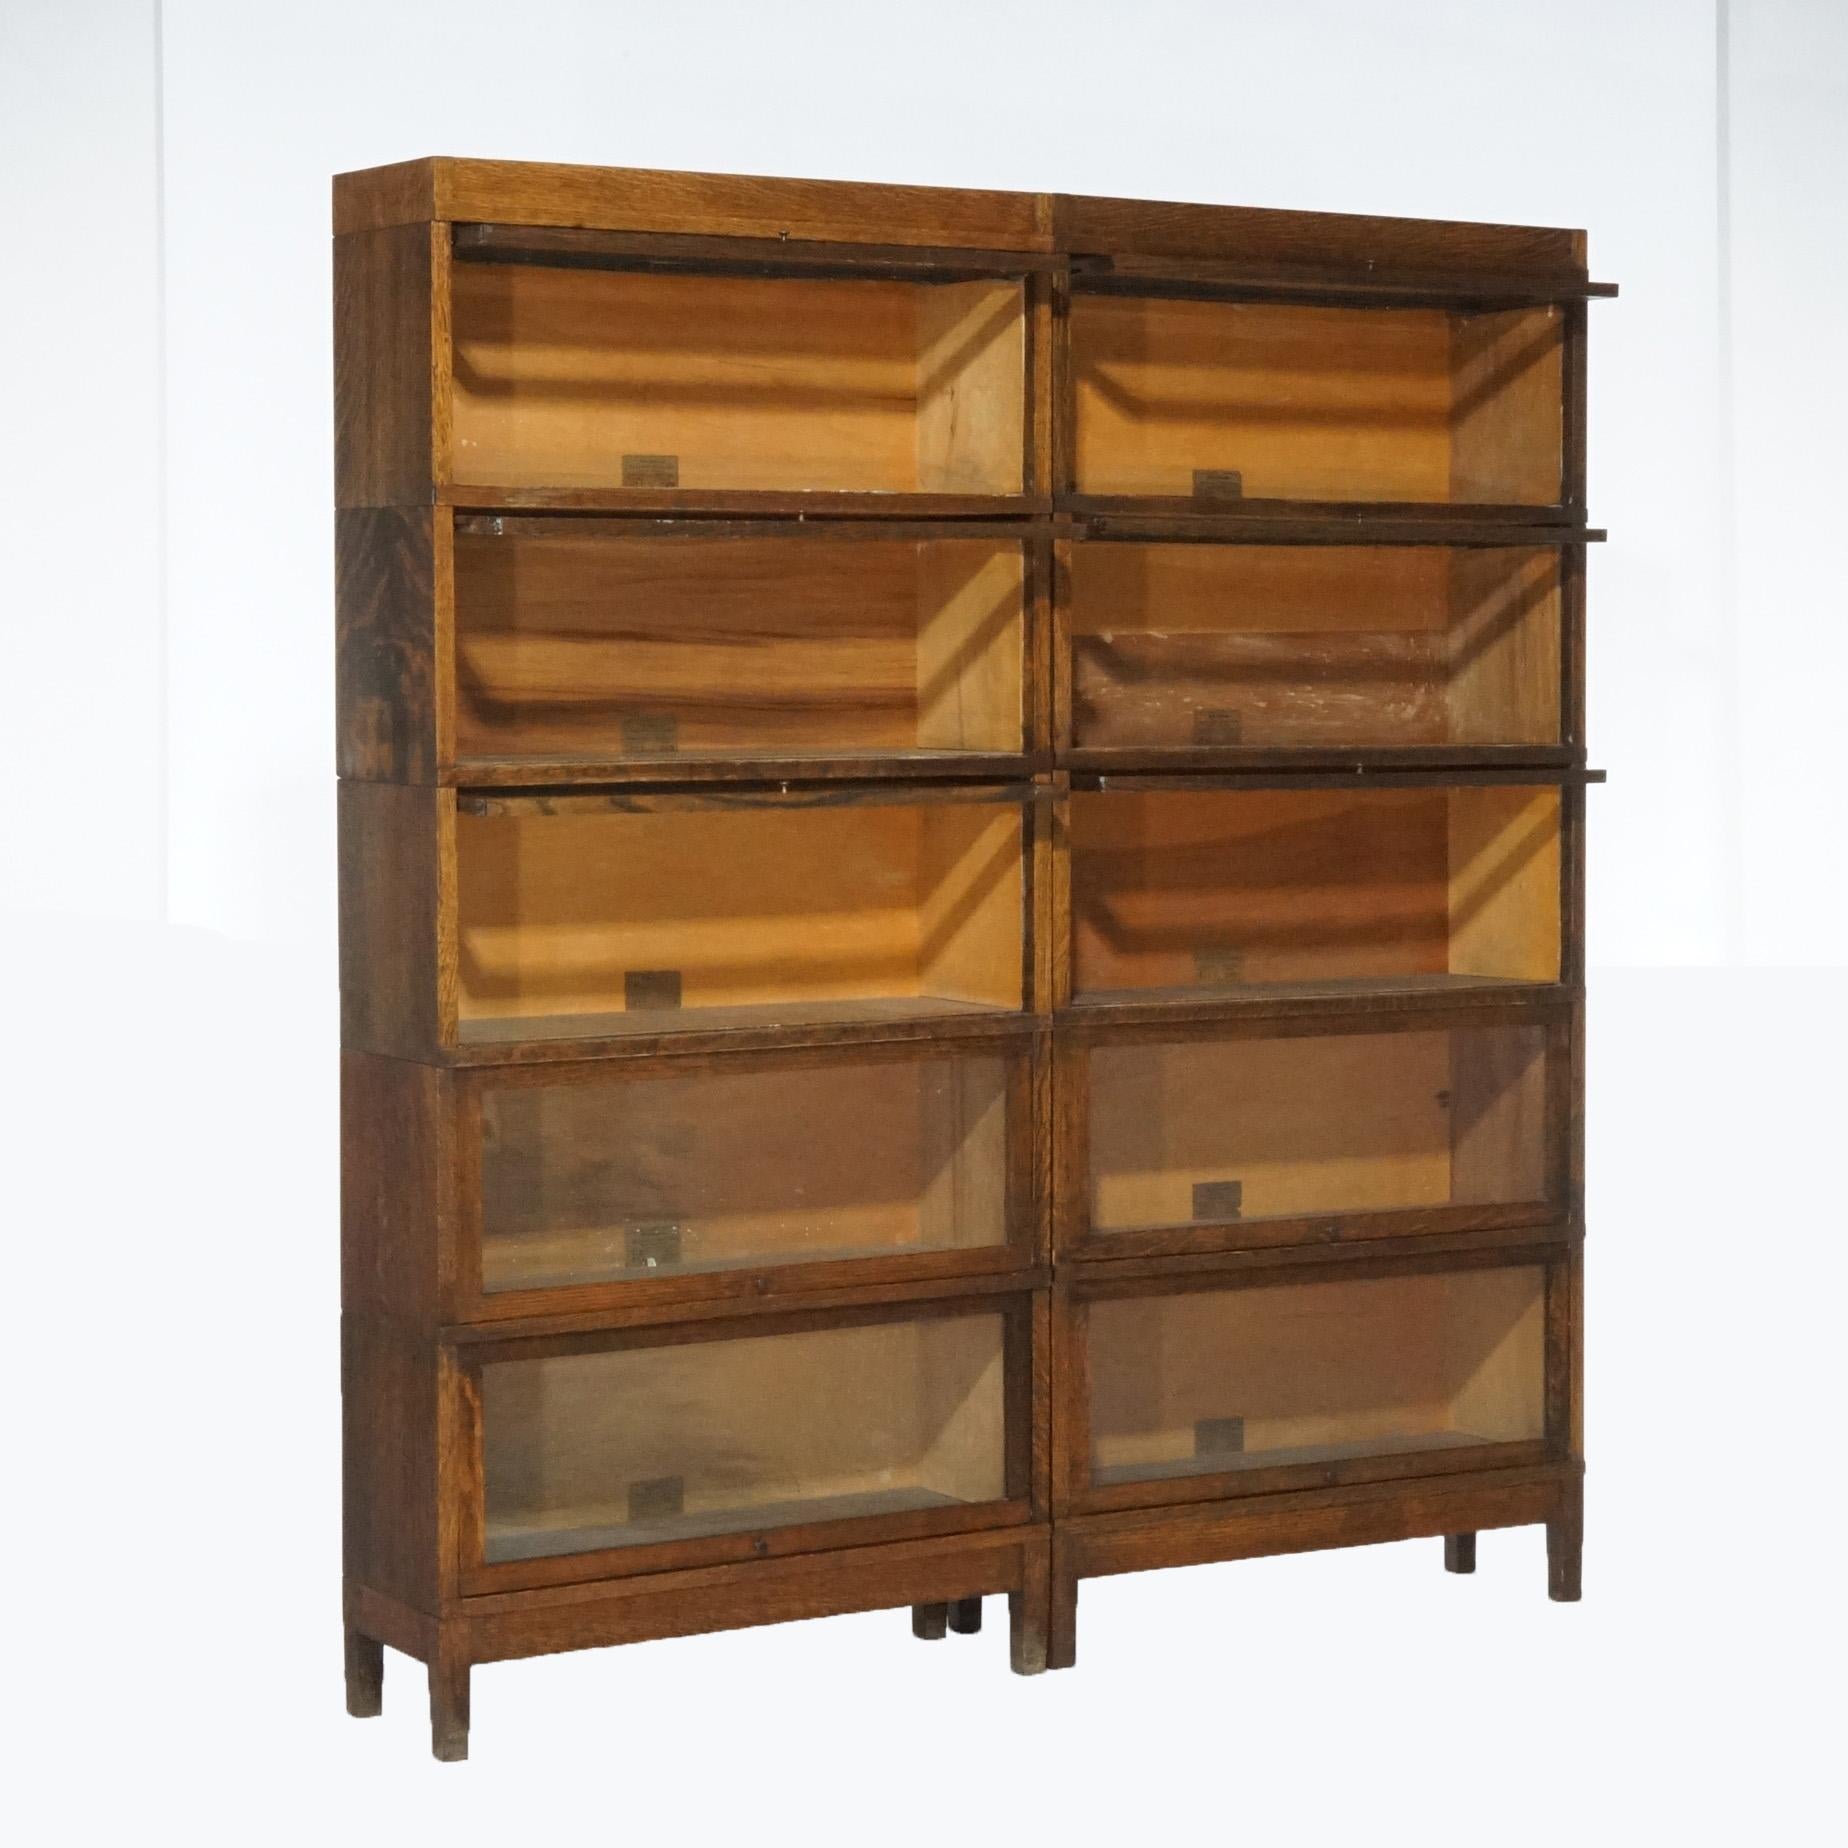 An antique matching pair of barrister bookcases by Globe Wernicke offer oak construction with each case having five stacks with pull out glass doors, raised on straight legs, maker label as photographed, circa 1910

Measures- overall 75.5''H x